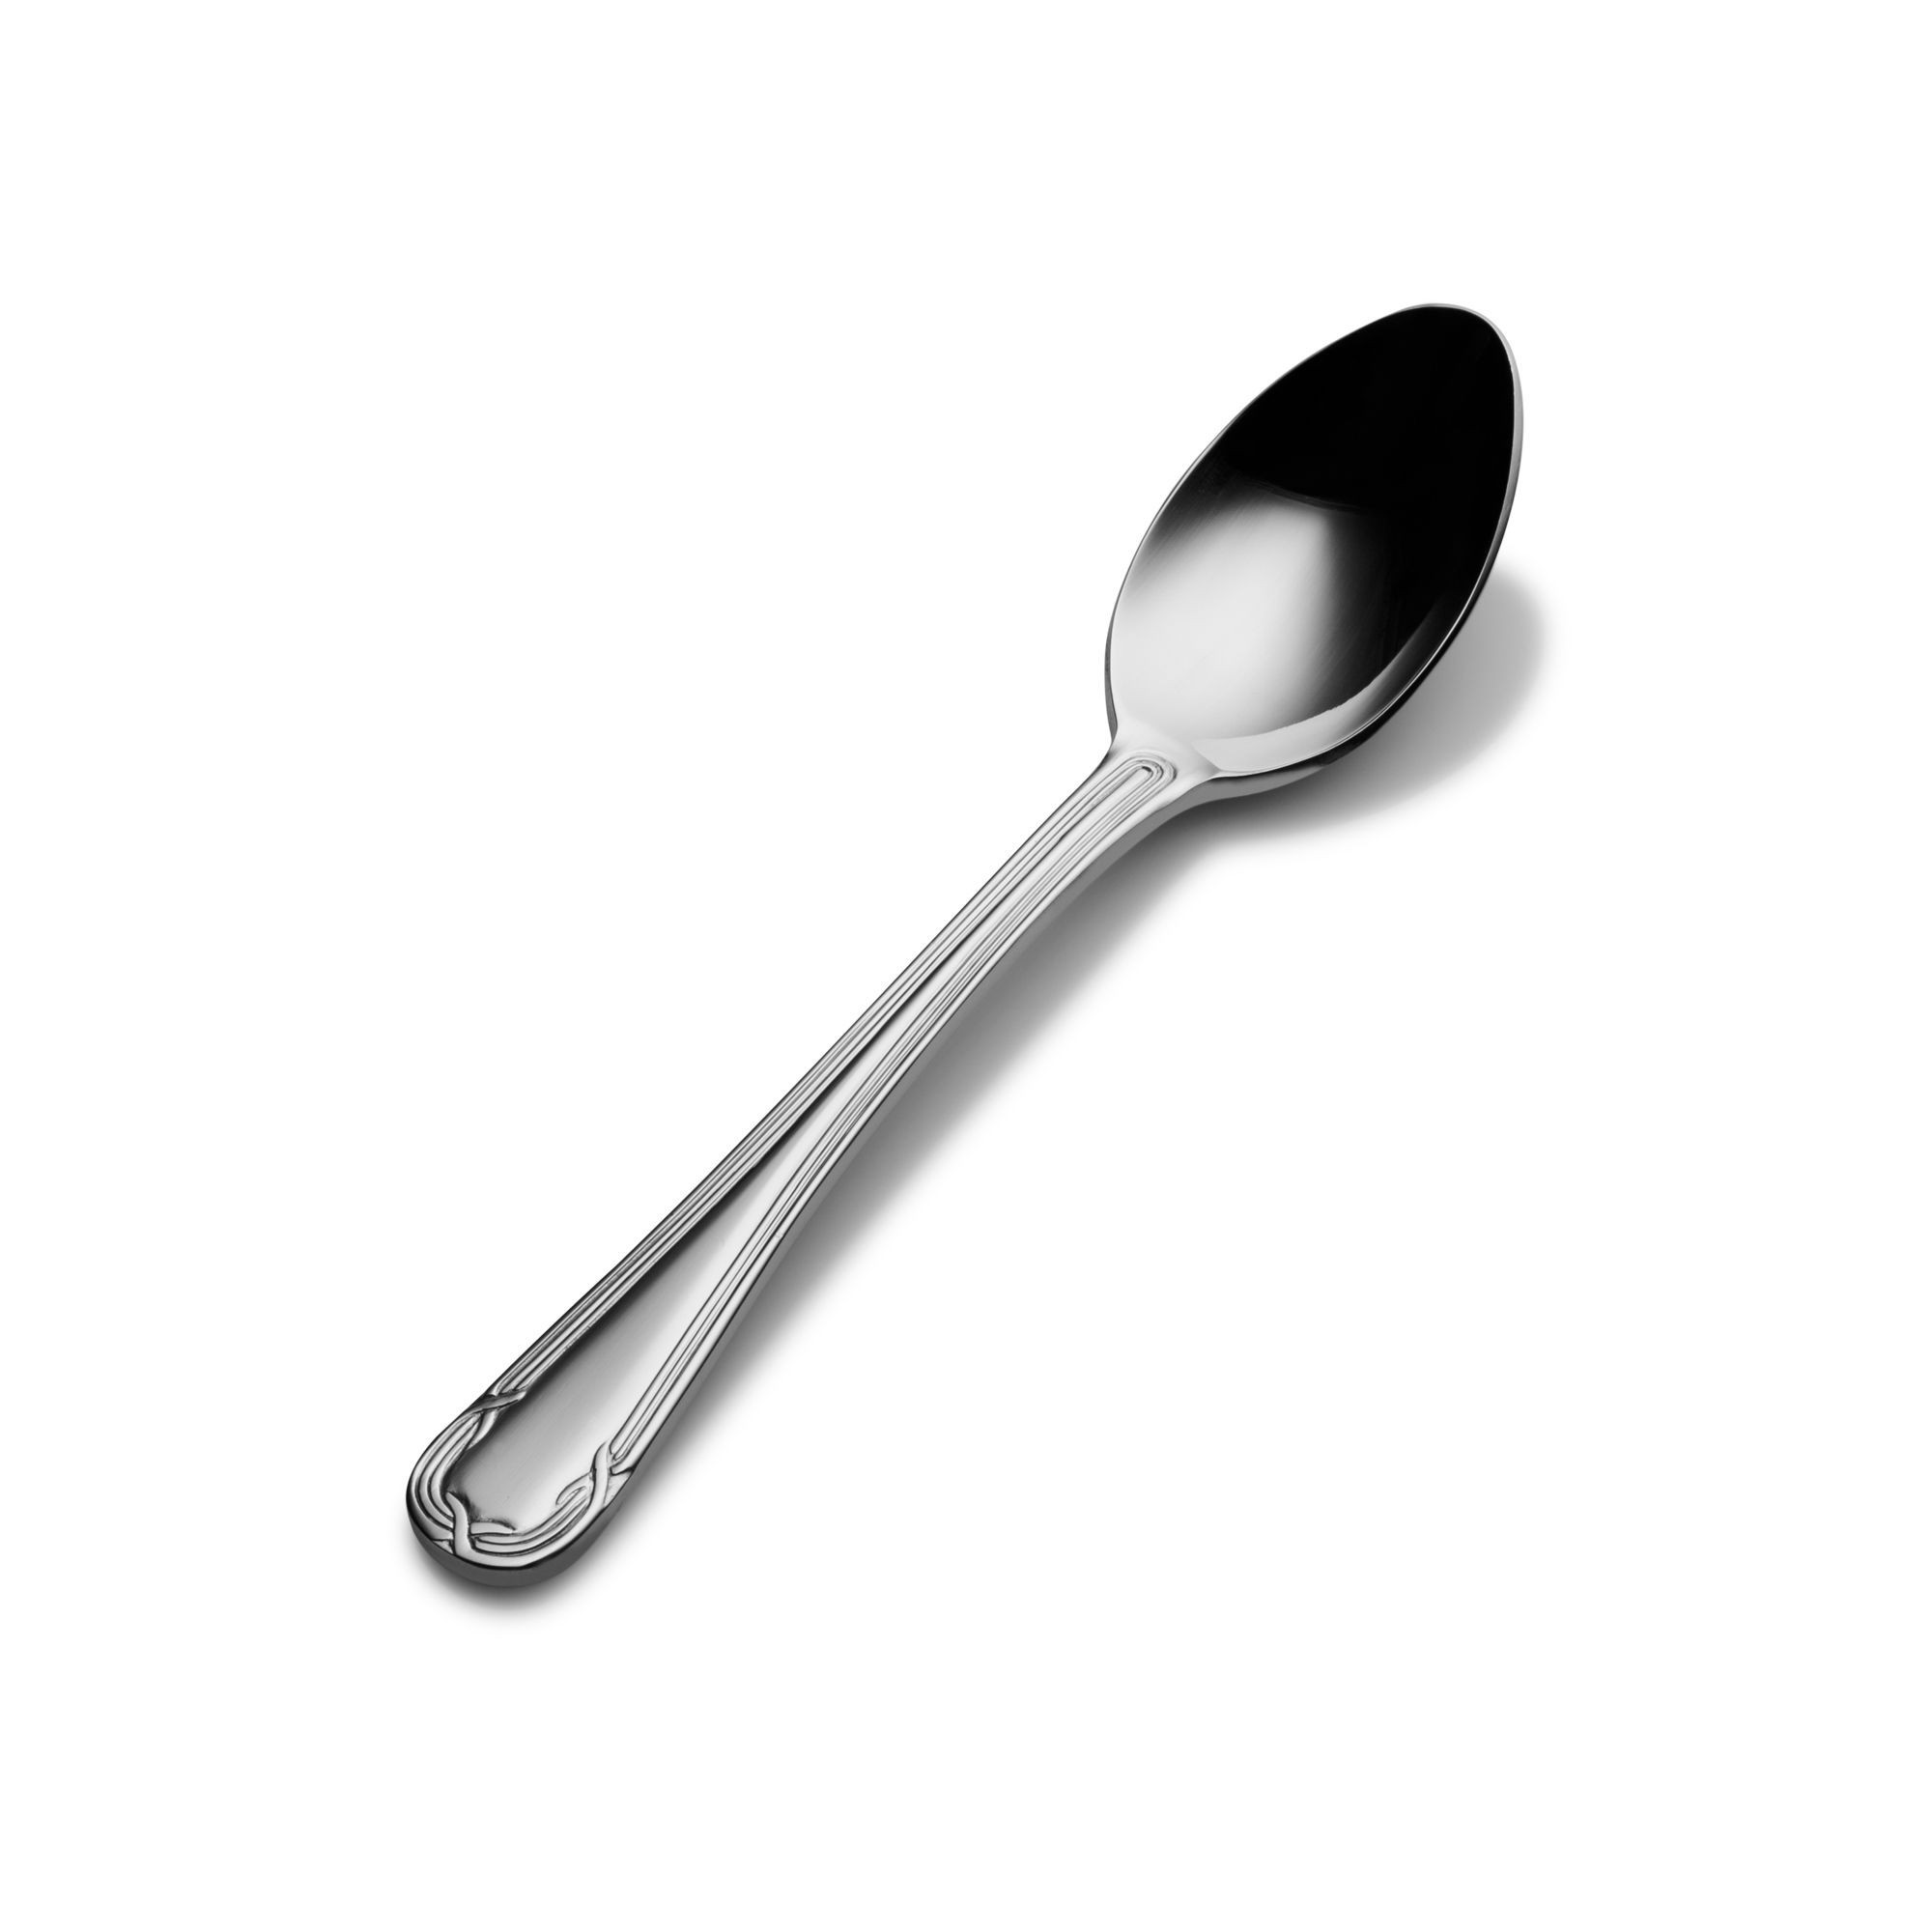 Bon Chef S800S Florence 18/8 Stainless Steel Silverplated Teaspoon